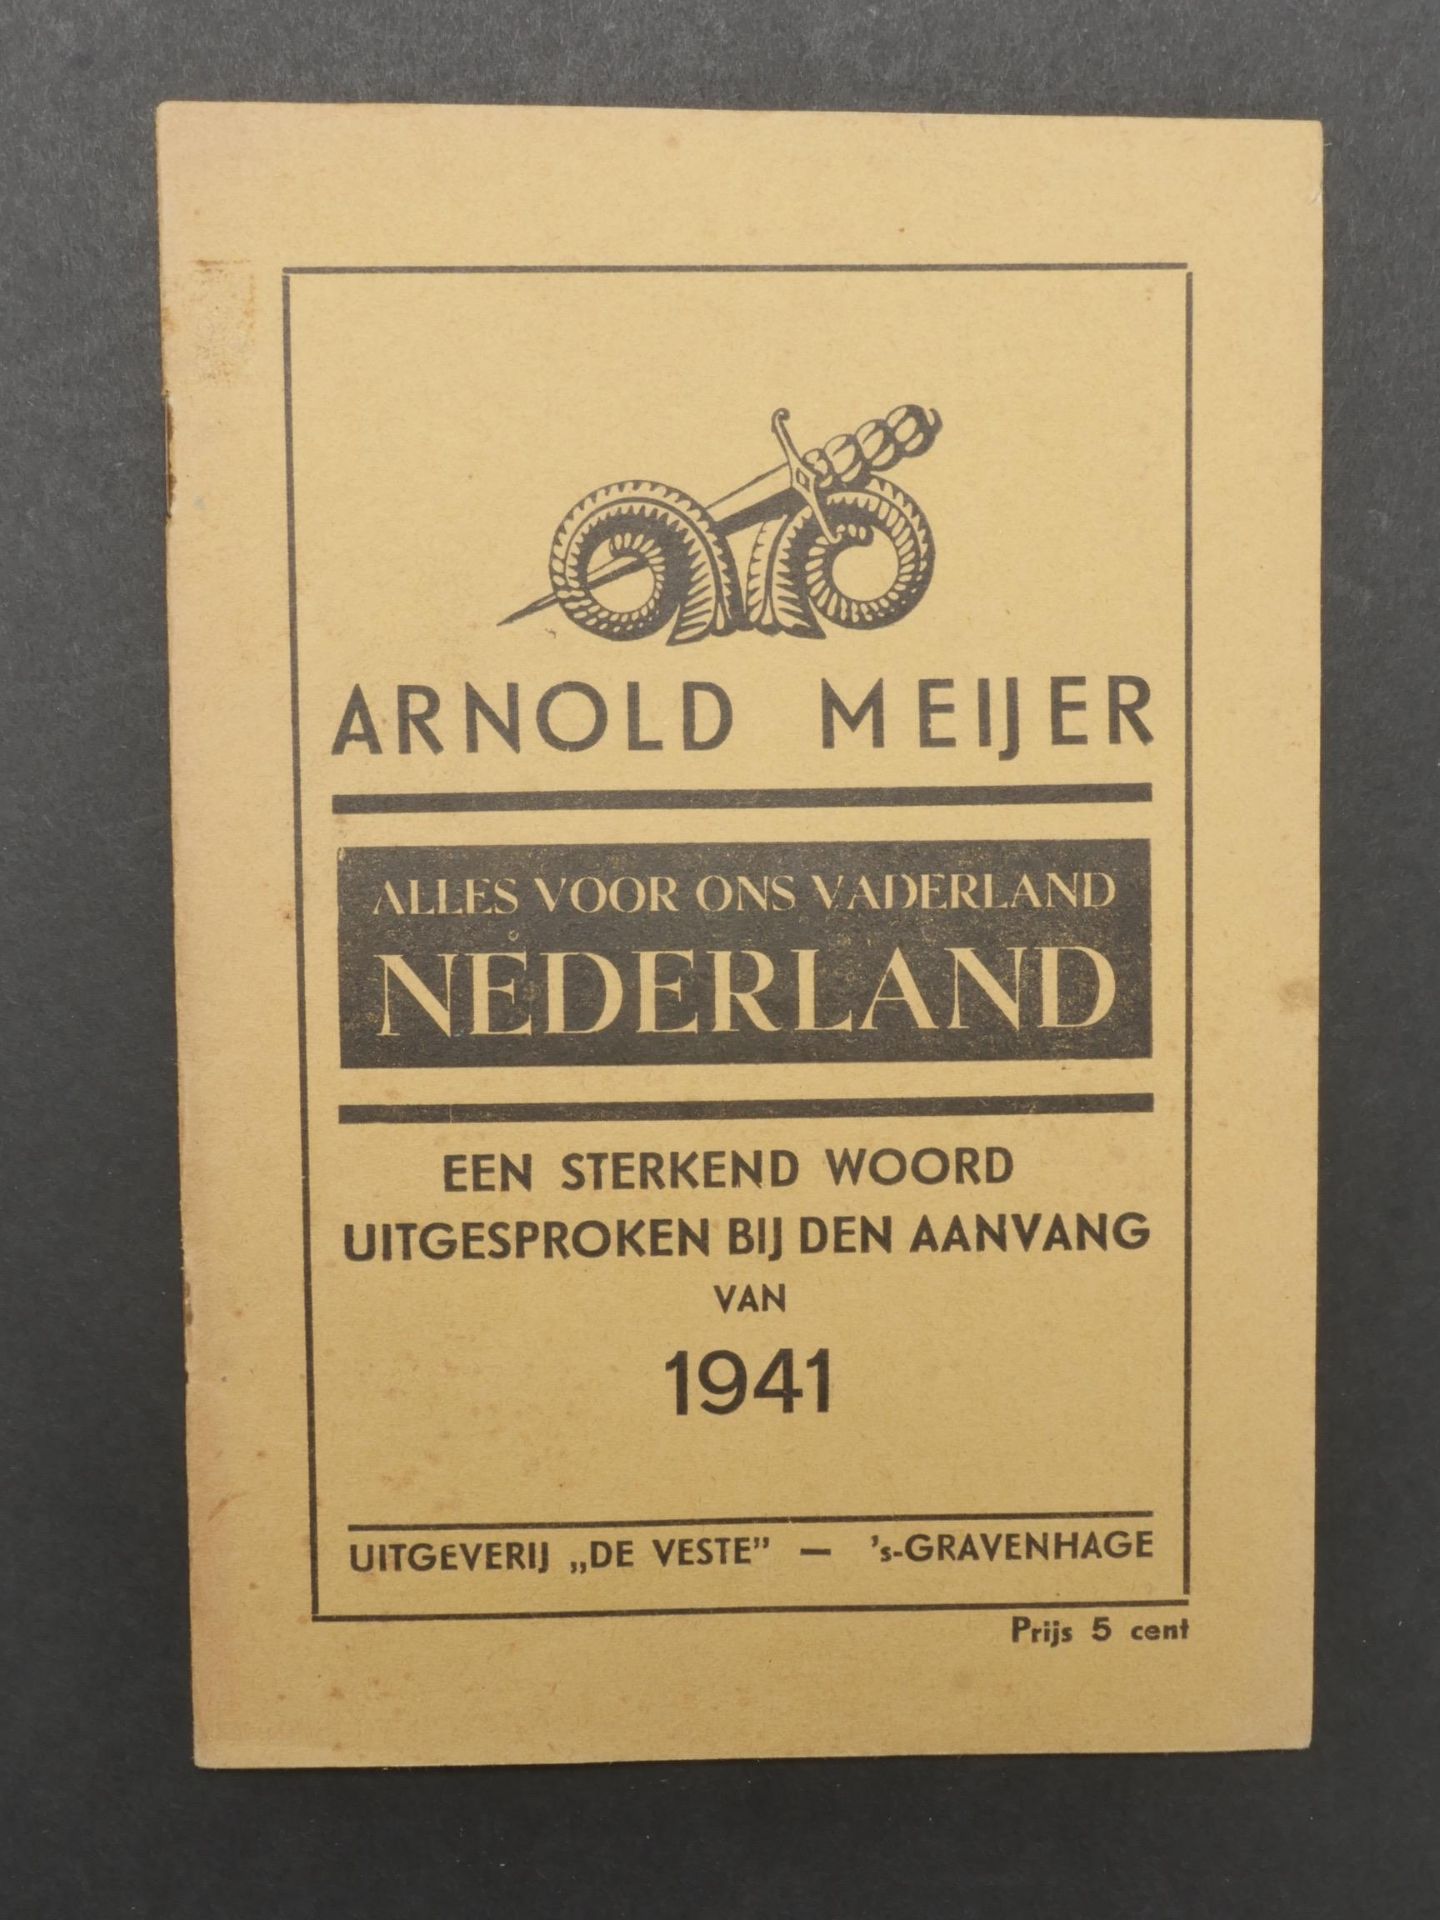 Holland Swart front. 